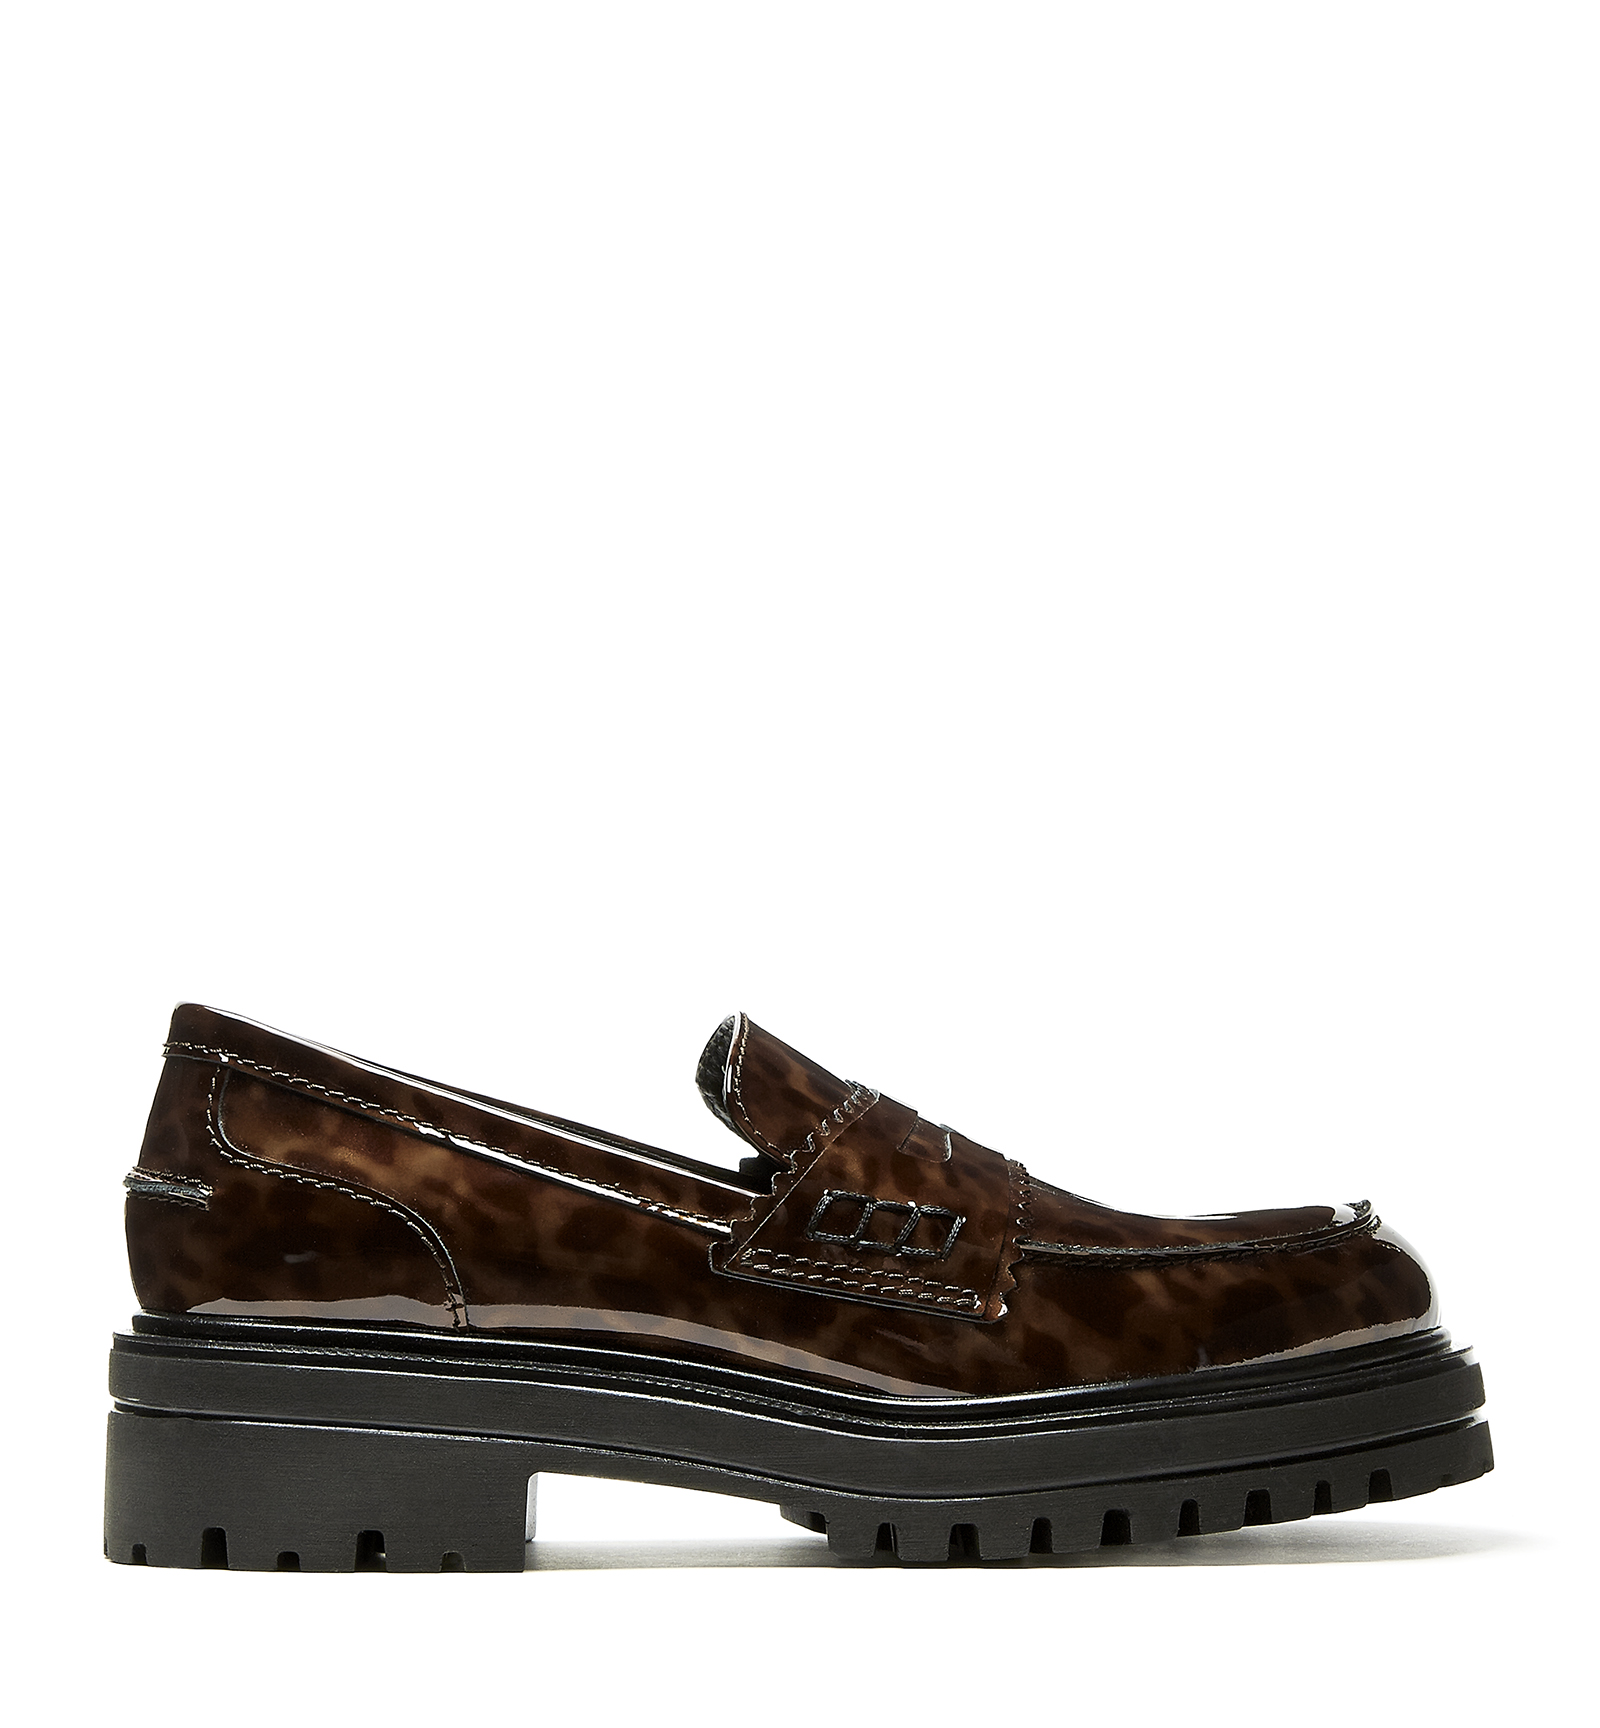 La Canadienne Rescale Patent Leather Loafer In Cognac